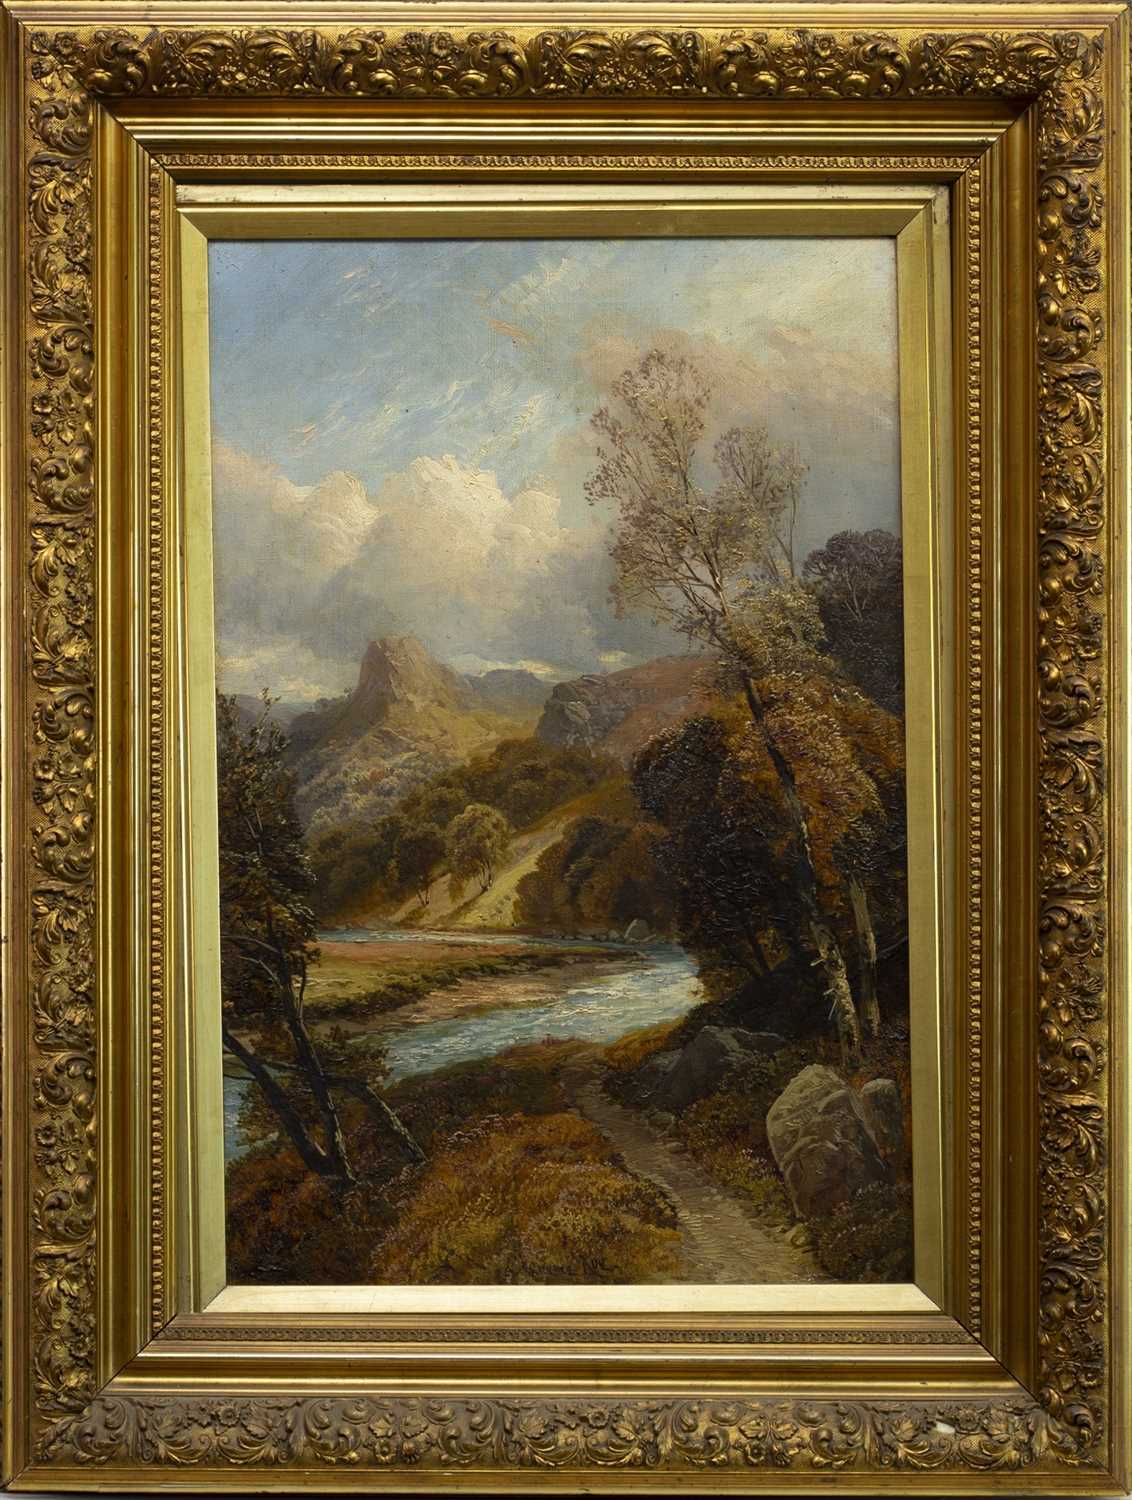 Lot 141 - HIGHLAND SCENE WITH LOCH, AN OIL BY CLARENCE HENRY ROE